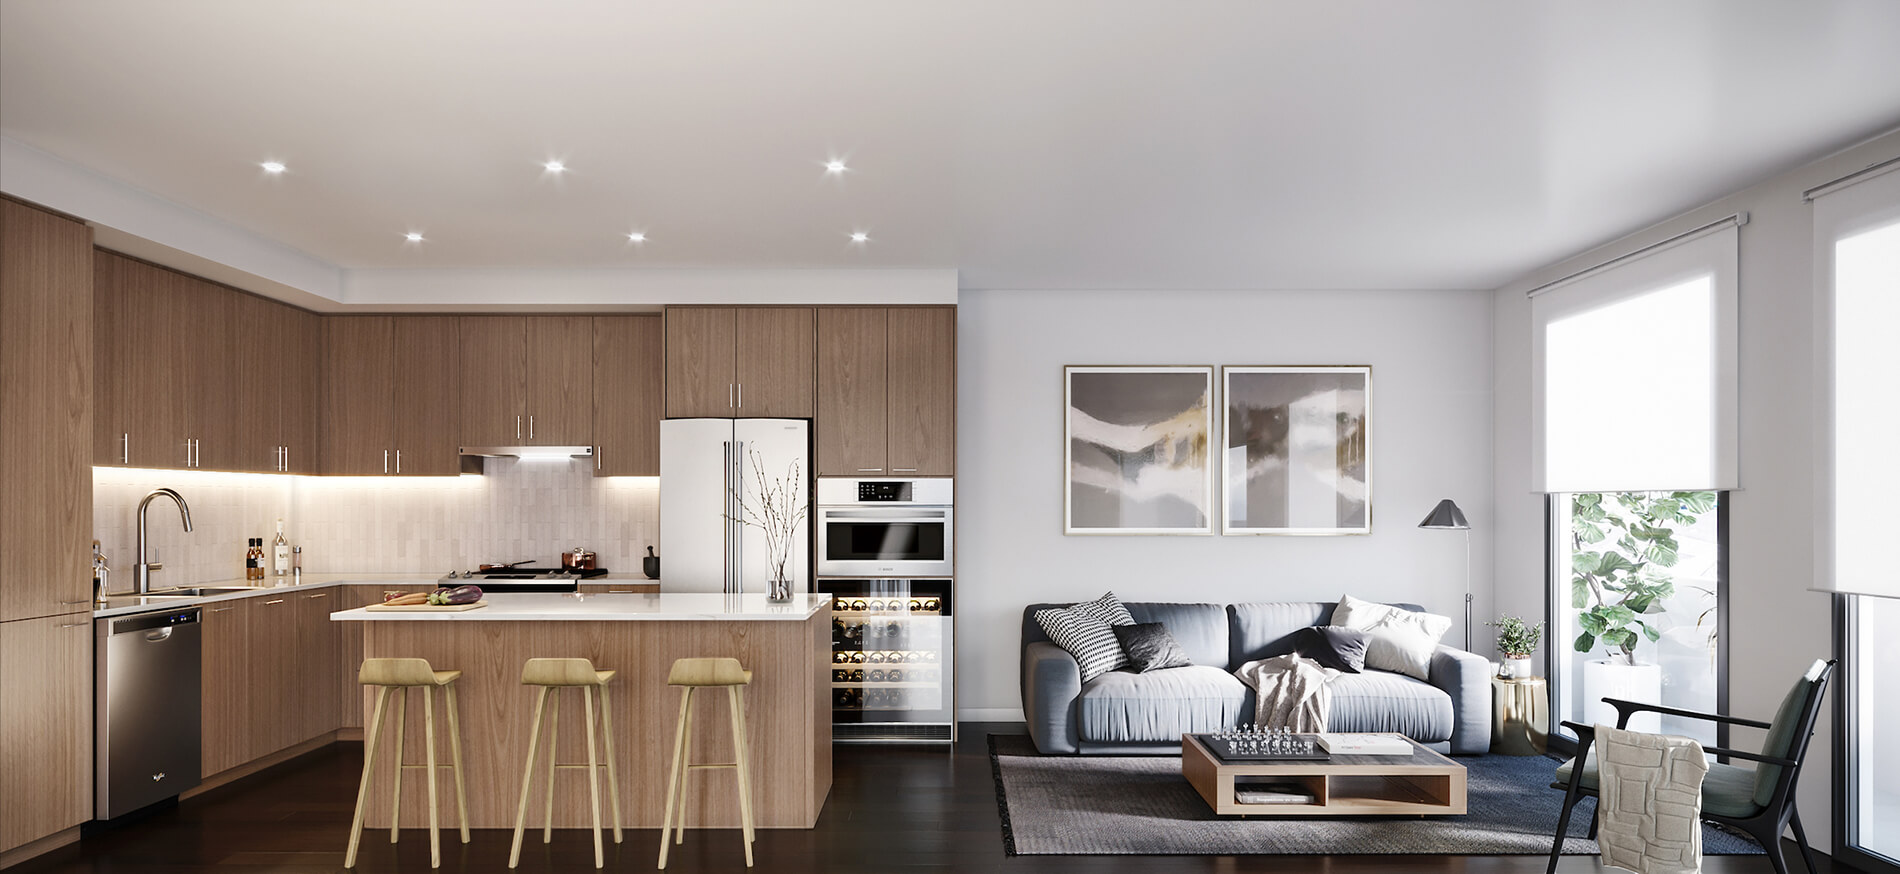 Penthouse apartment rendering